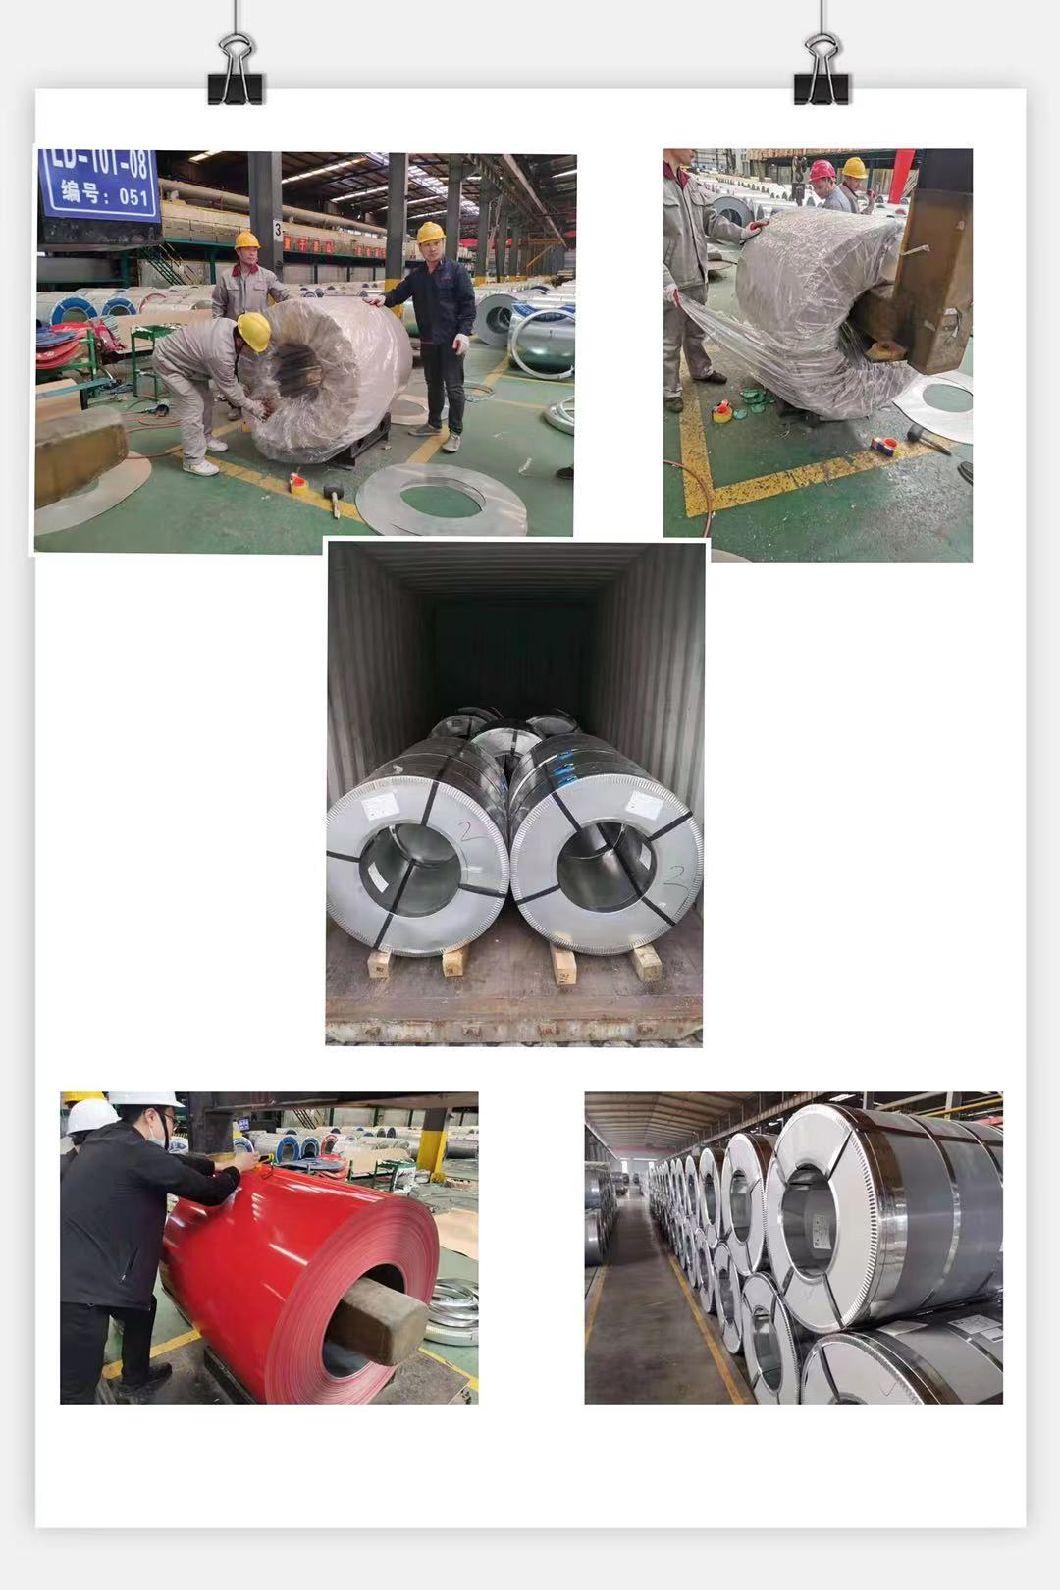 Prepainted Gl Steel Coil / PPGI /Low Price Cold Rolled PPGL Color Coated Galvanized Steel Coil